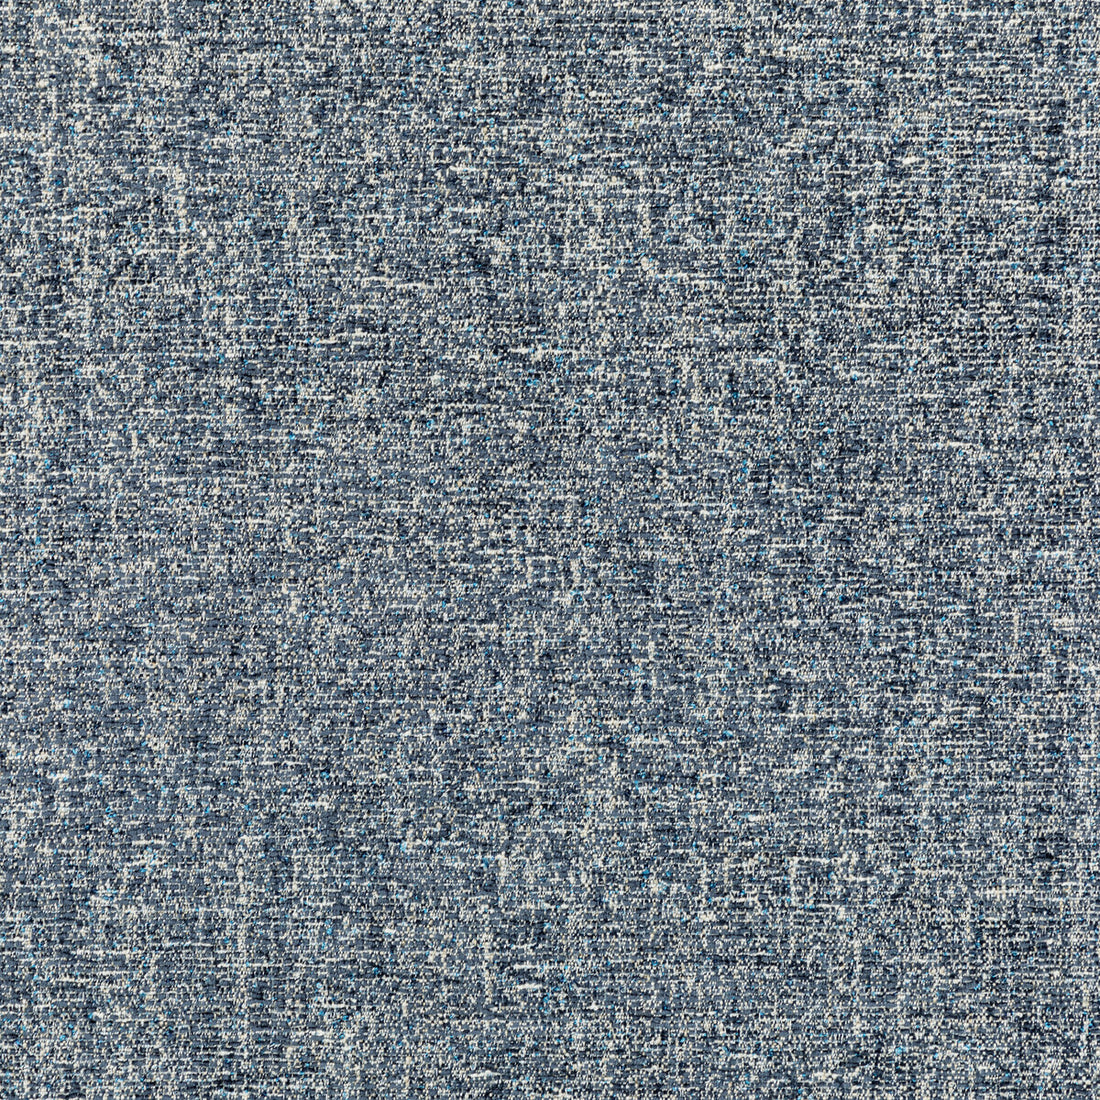 Leading Lady fabric in indigo color - pattern 36109.50.0 - by Kravet Couture in the Luxury Textures II collection